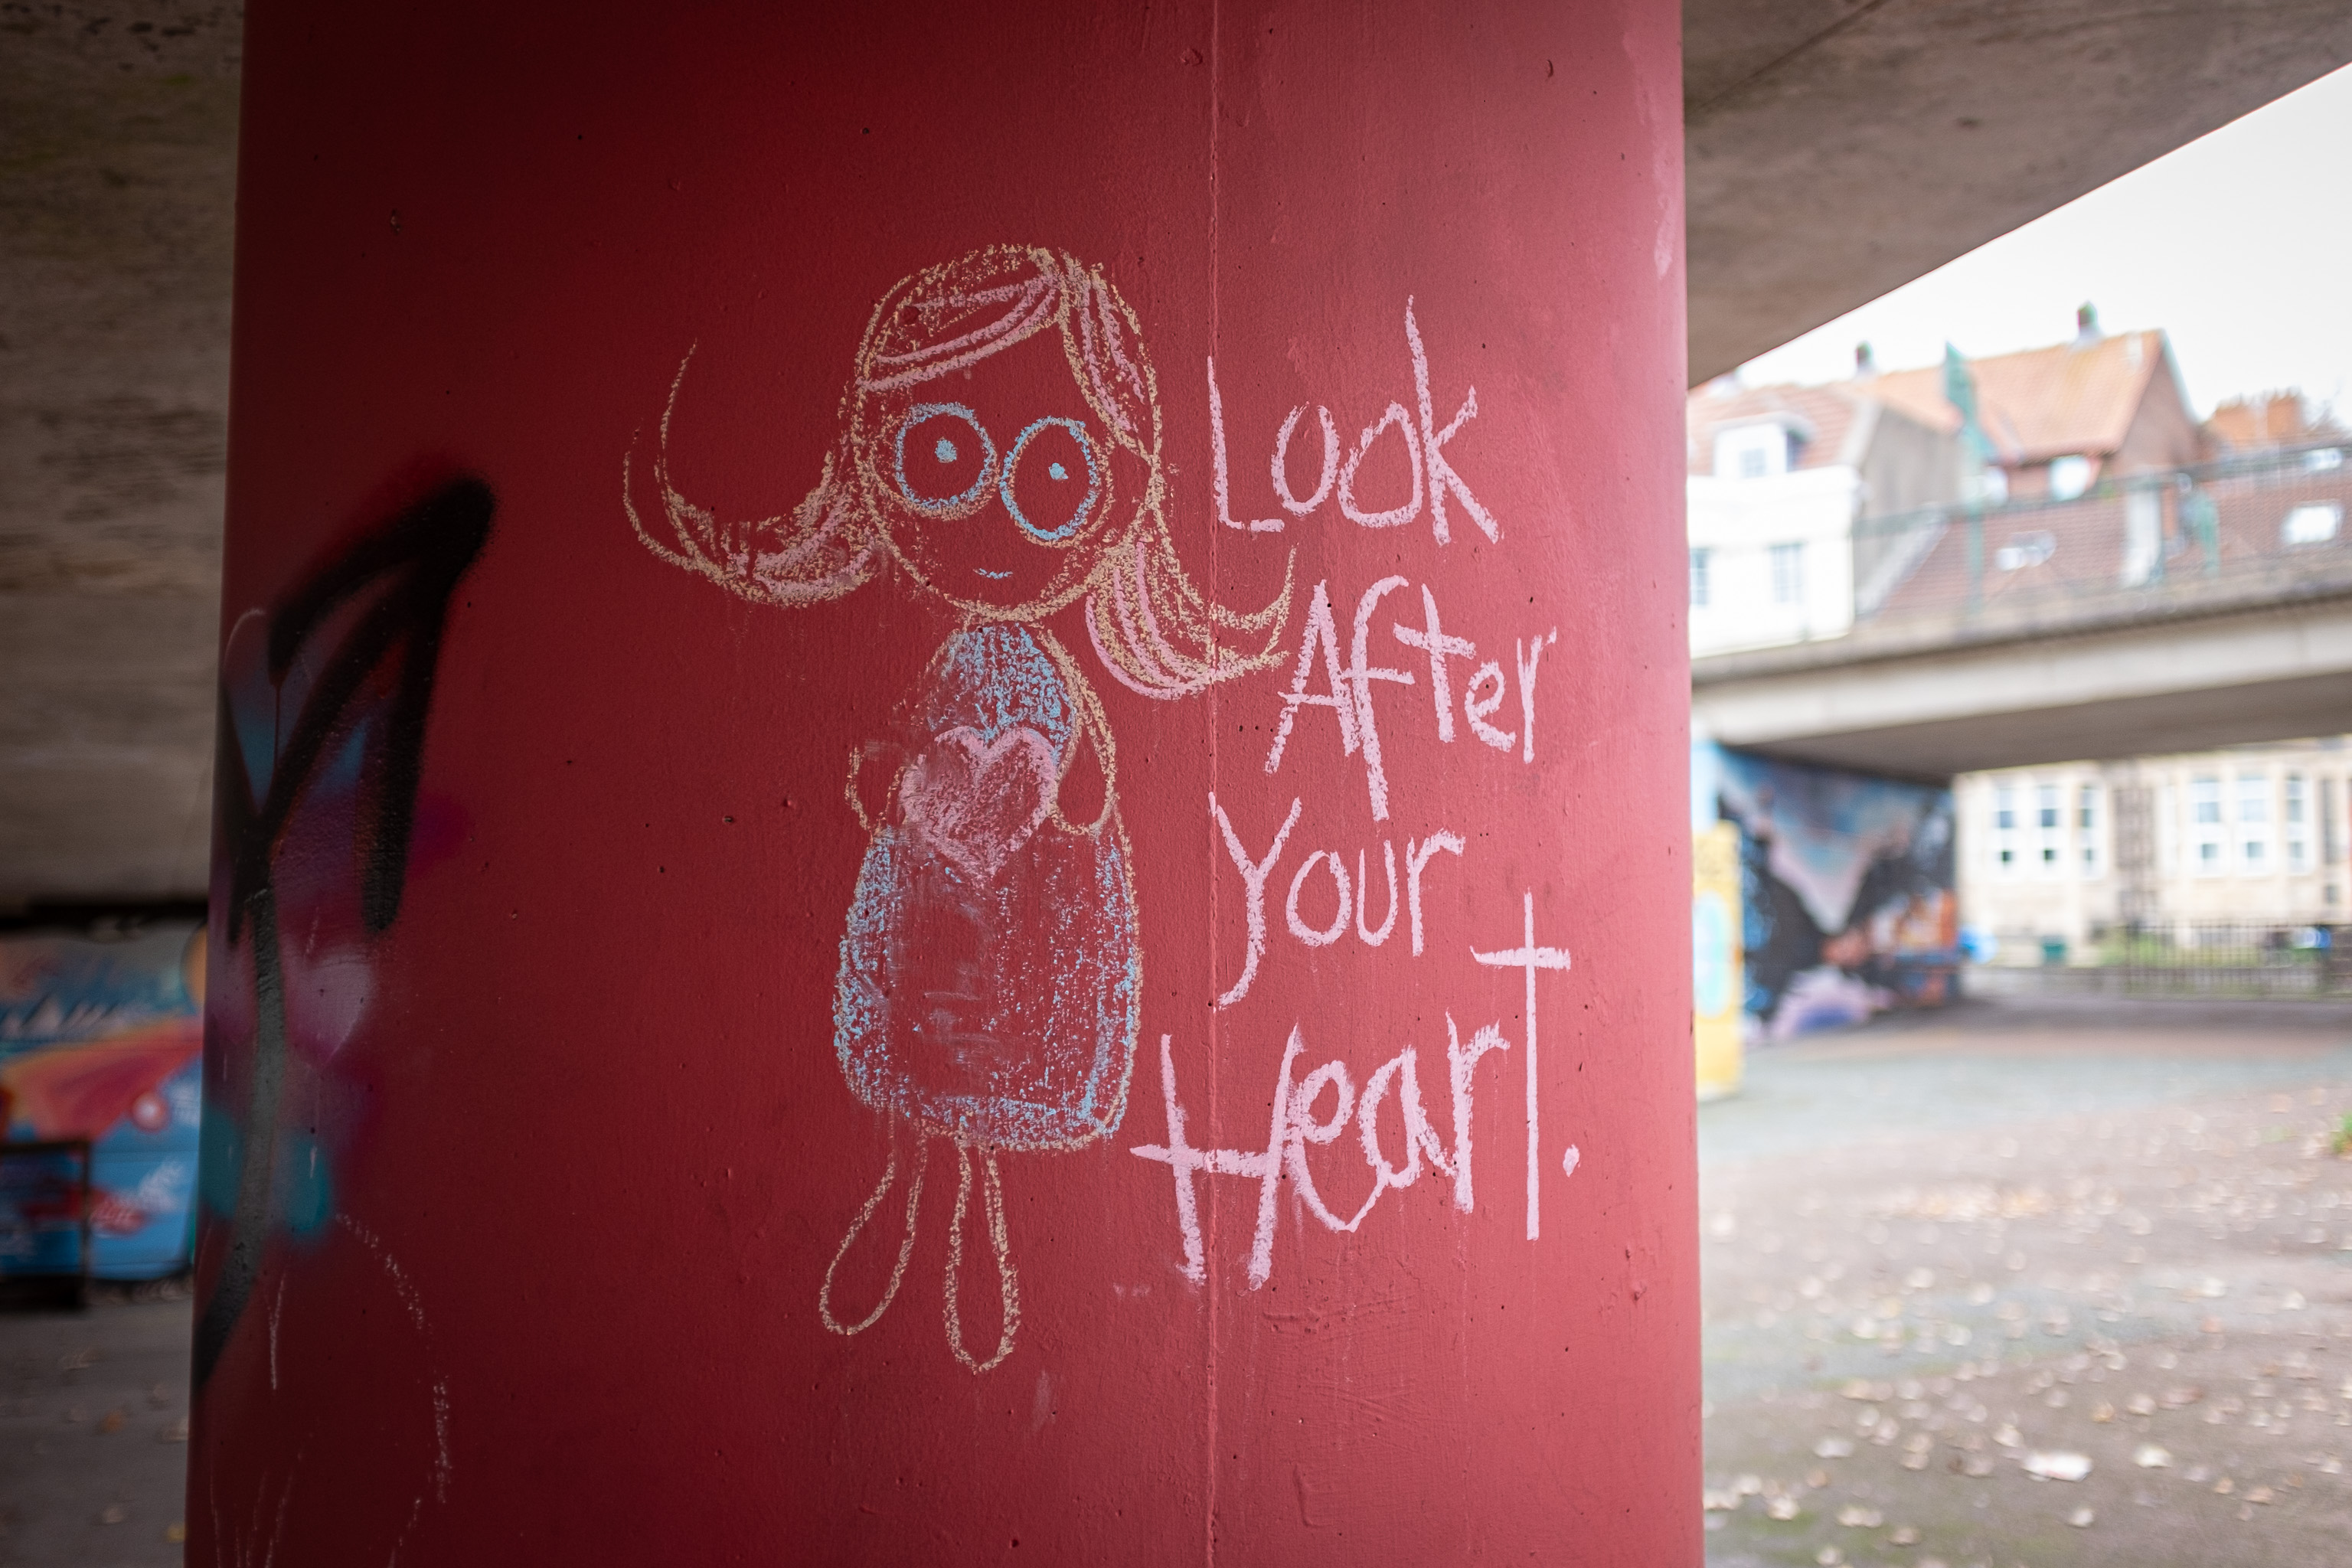 Look After Your Heart
Good advice
